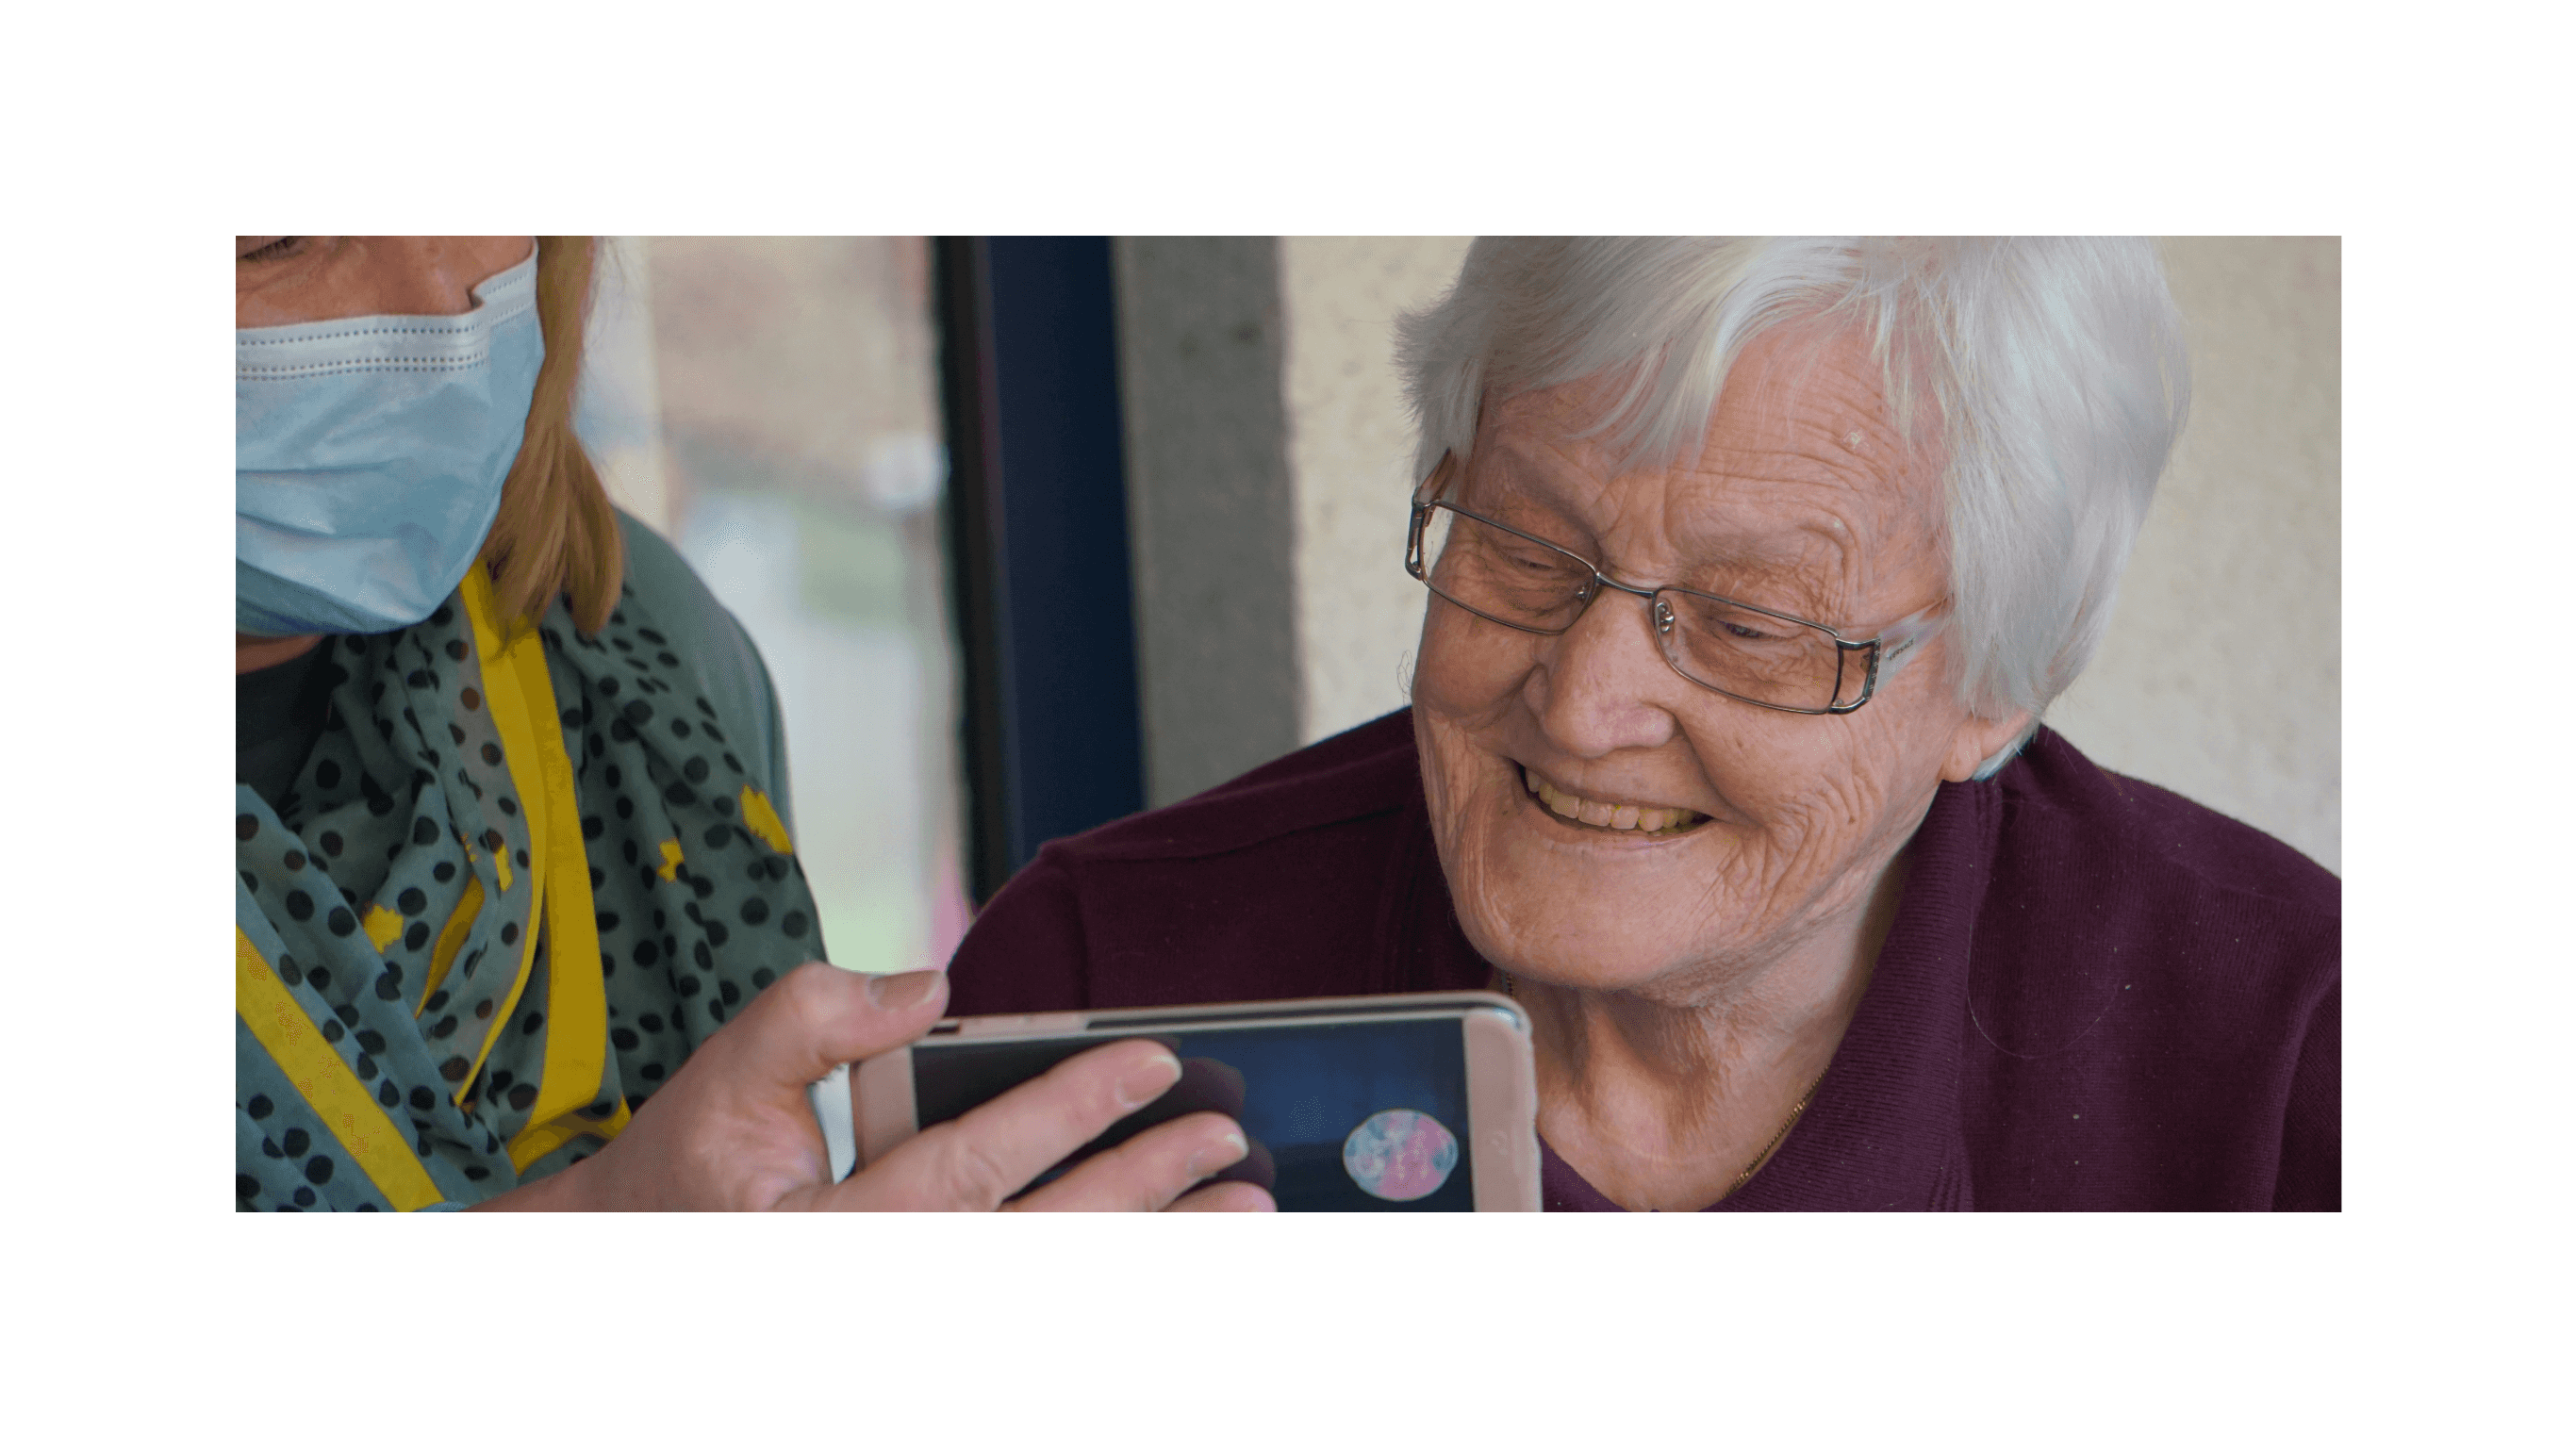 Digitally Connecting the UK Care Homes